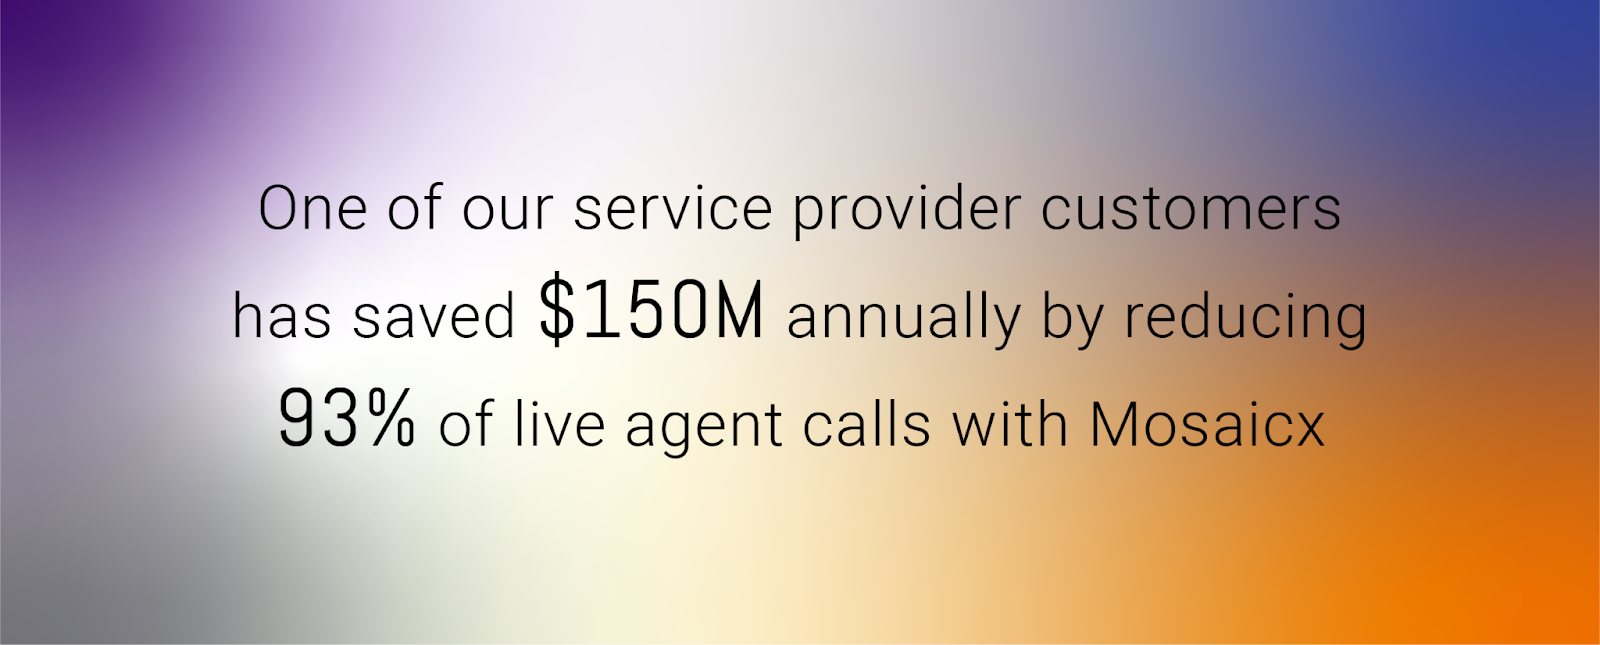 One of our service provider customers has saved $150M annually by reducing 93% of live agent calls with Mosaicx.